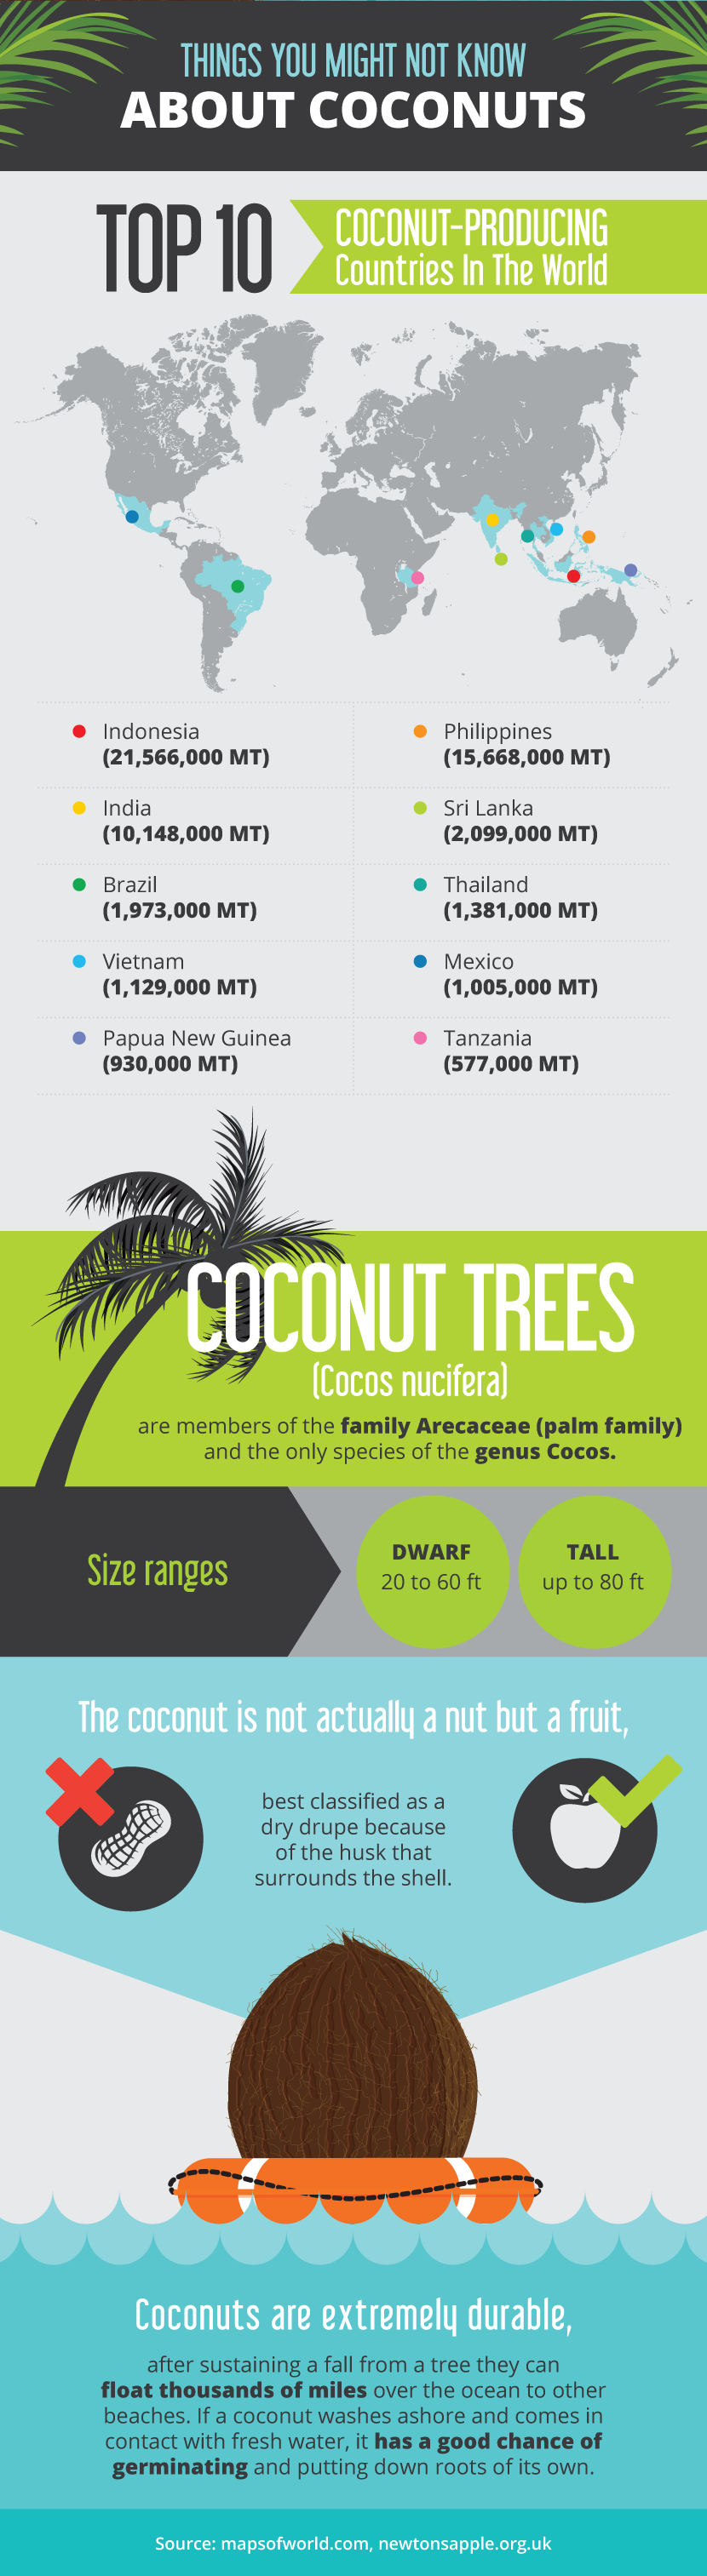 Facts About Coconuts - Unique Ways to Incorporate Coconuts Into Your Life